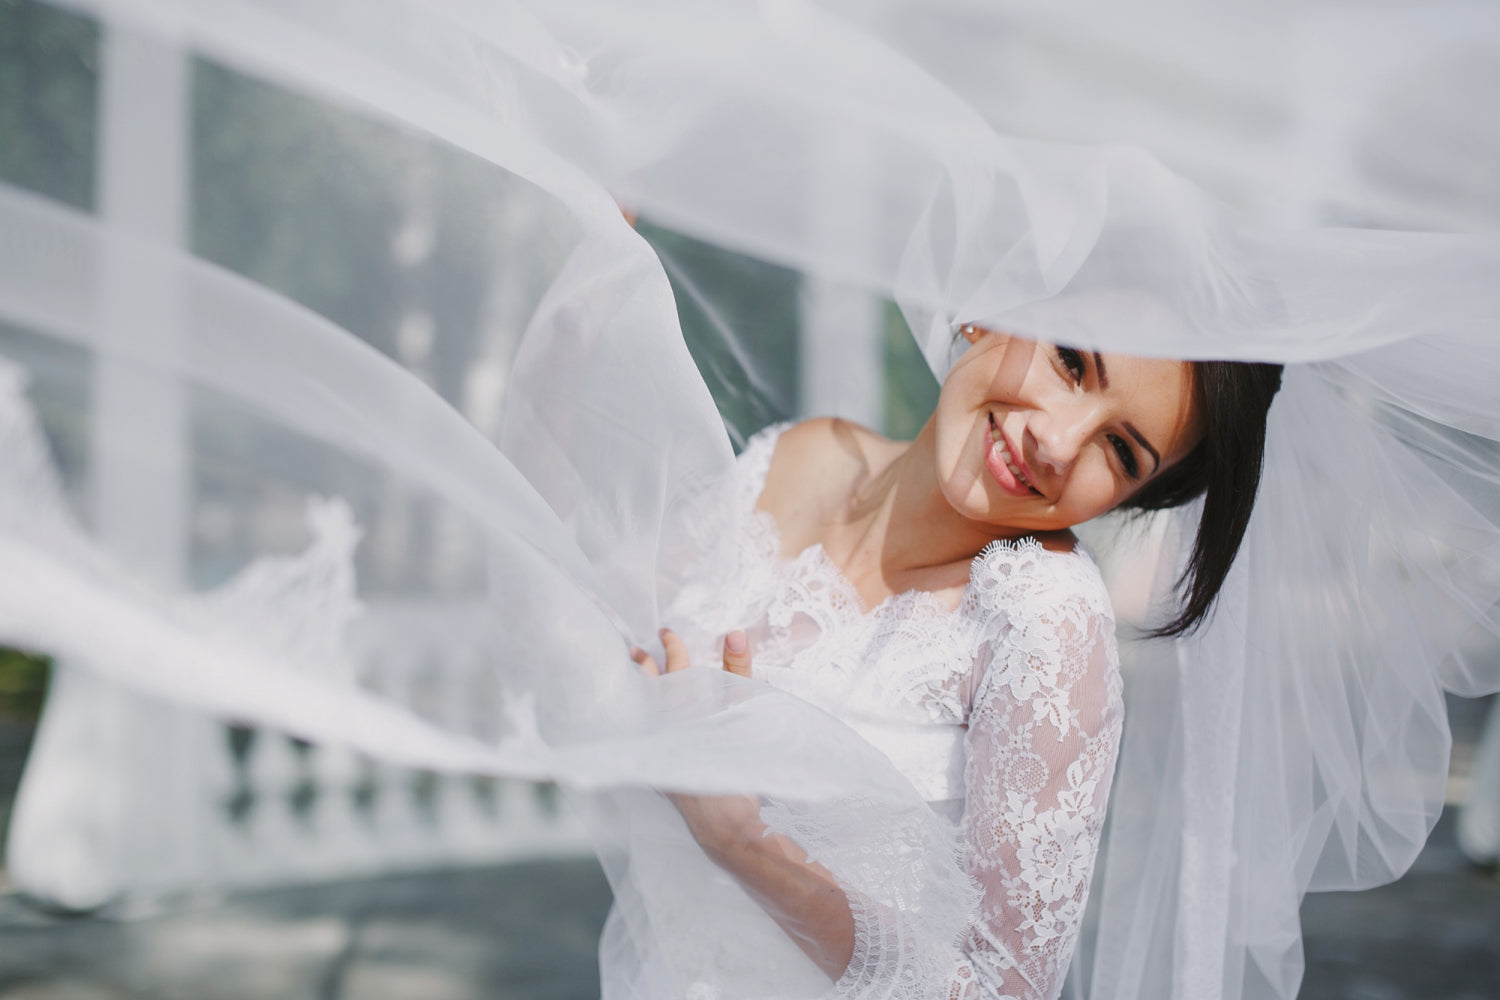 Wedding Dress Cleaning Toronto | Wedding Gown Cleaning